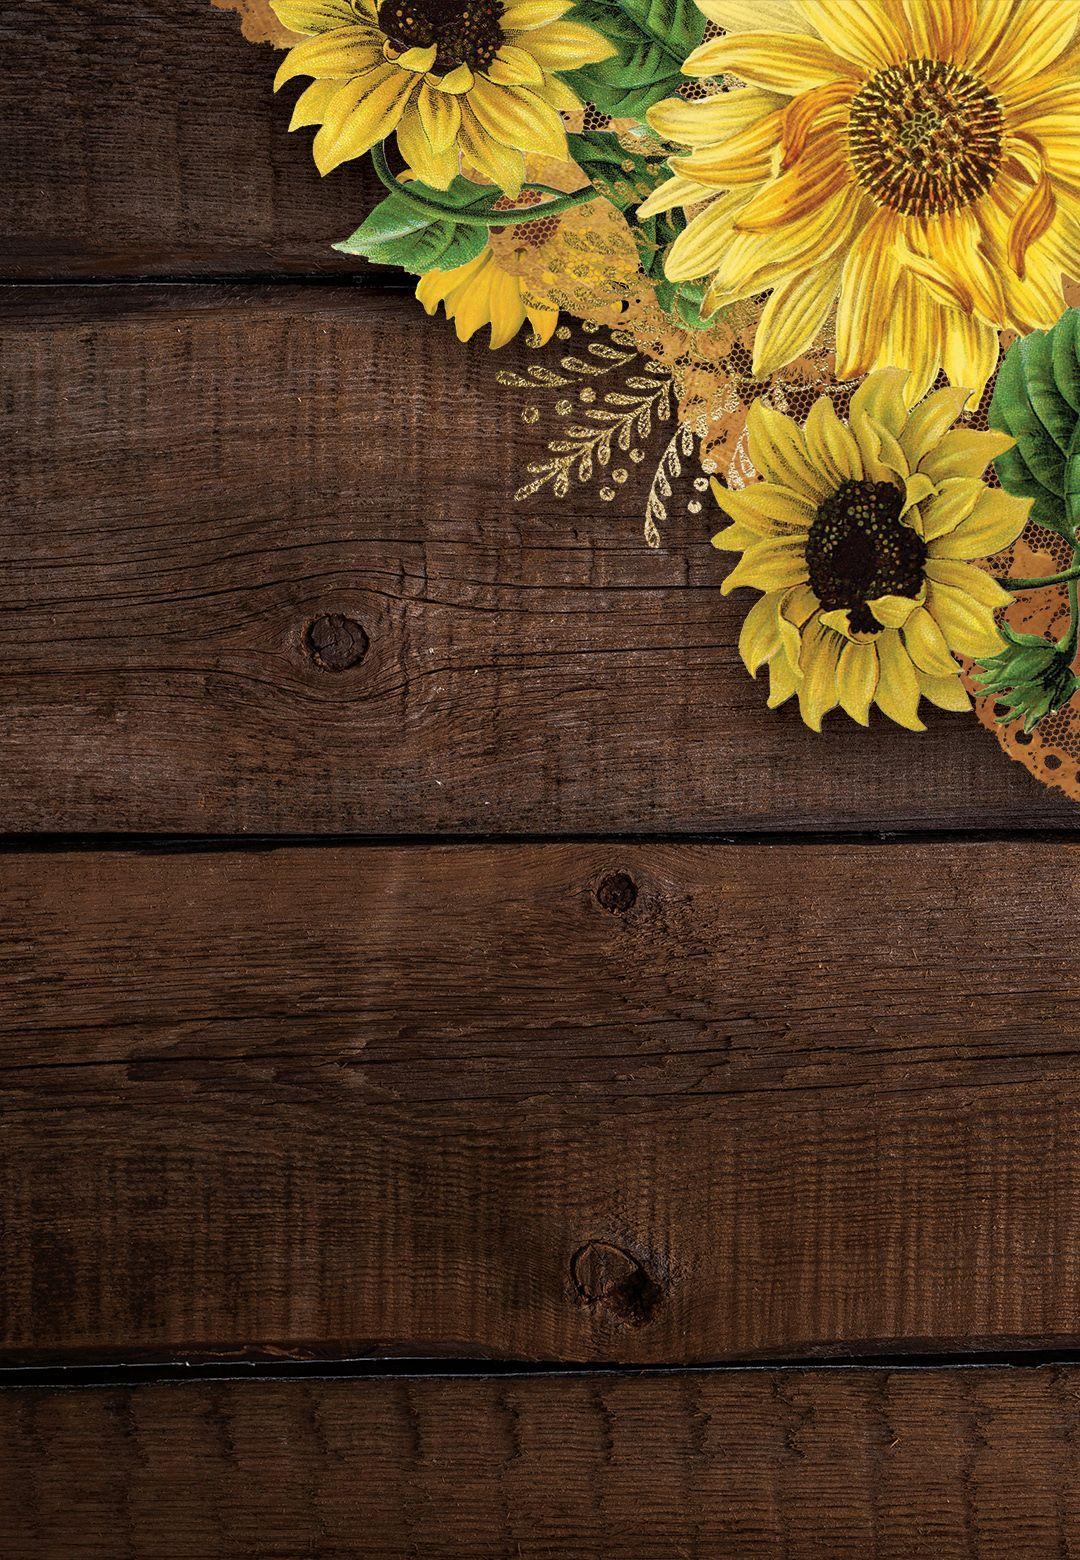 Rustic Sunflower Wallpapers - Top Free Rustic Sunflower ...